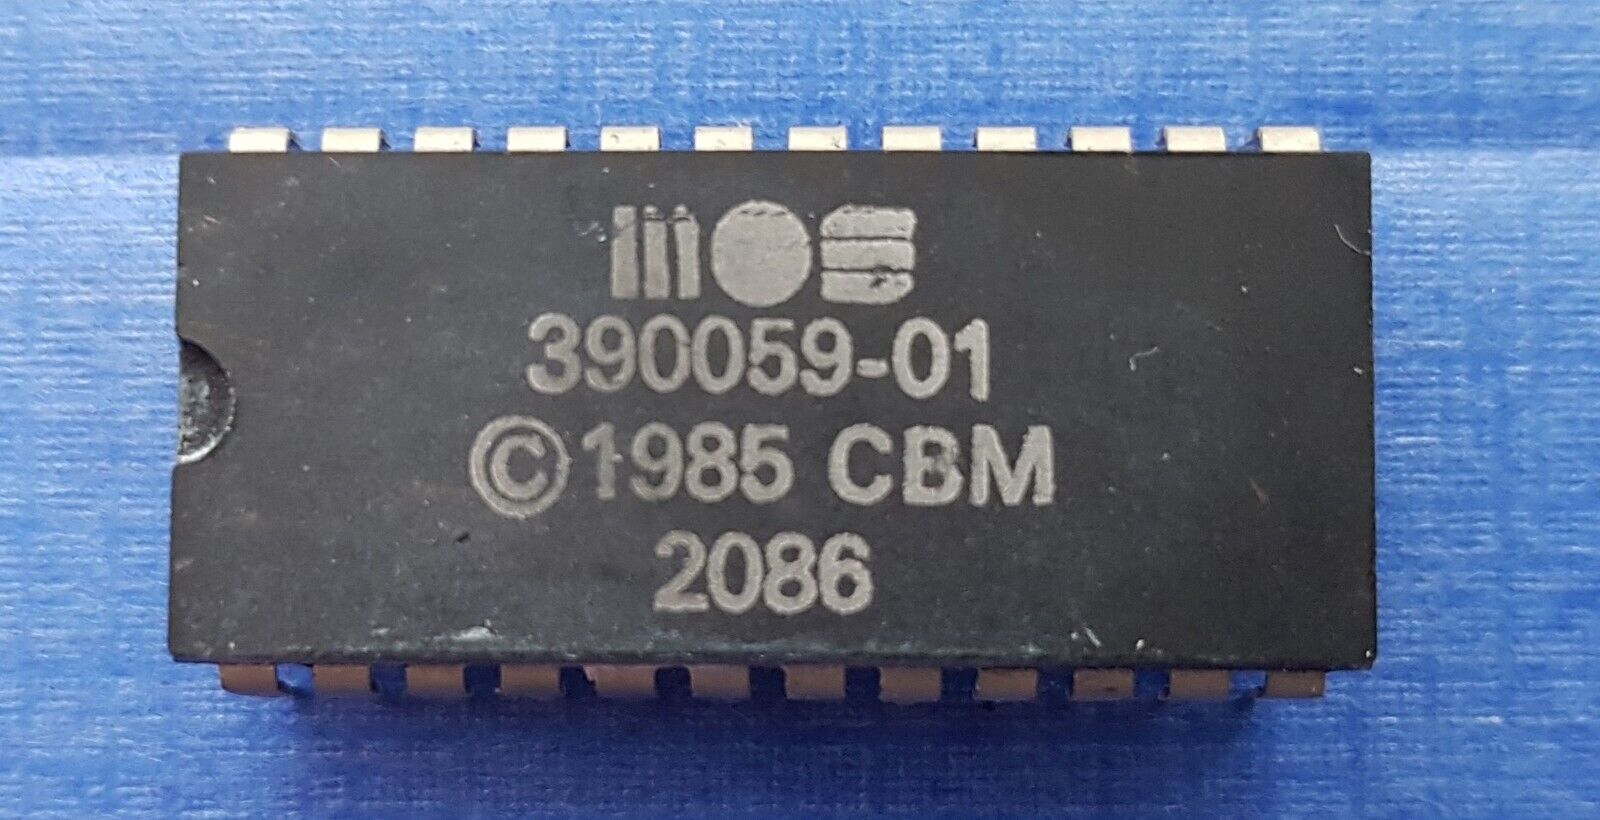 MOS 390059-01 Character ROM Chip U18 for COMMODORE 128 Genuine part, working.